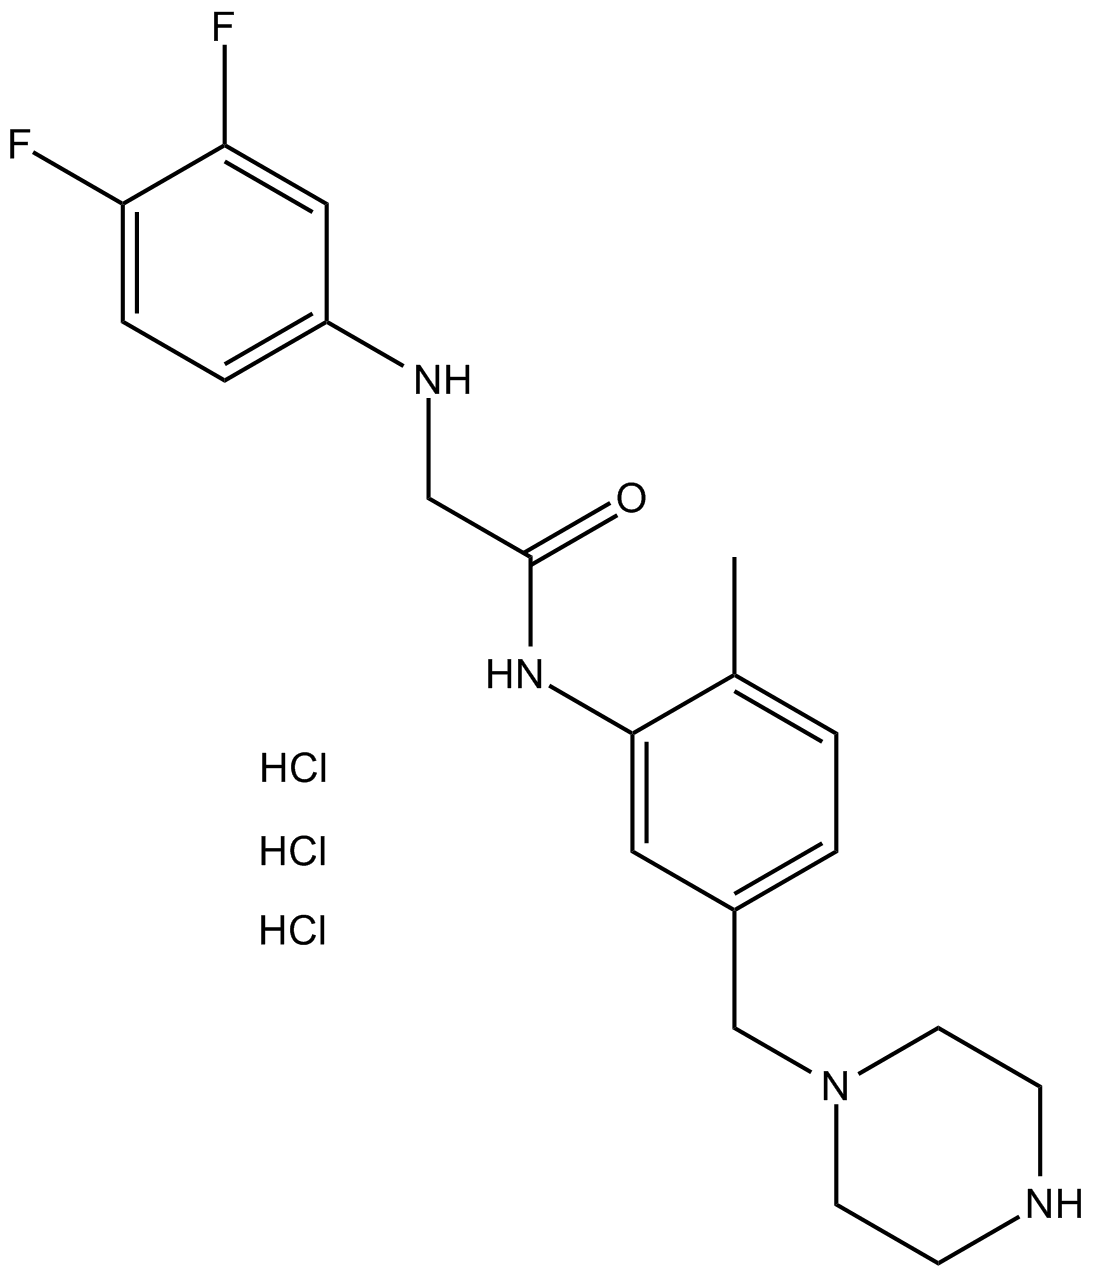 GW791343 HCl  Chemical Structure